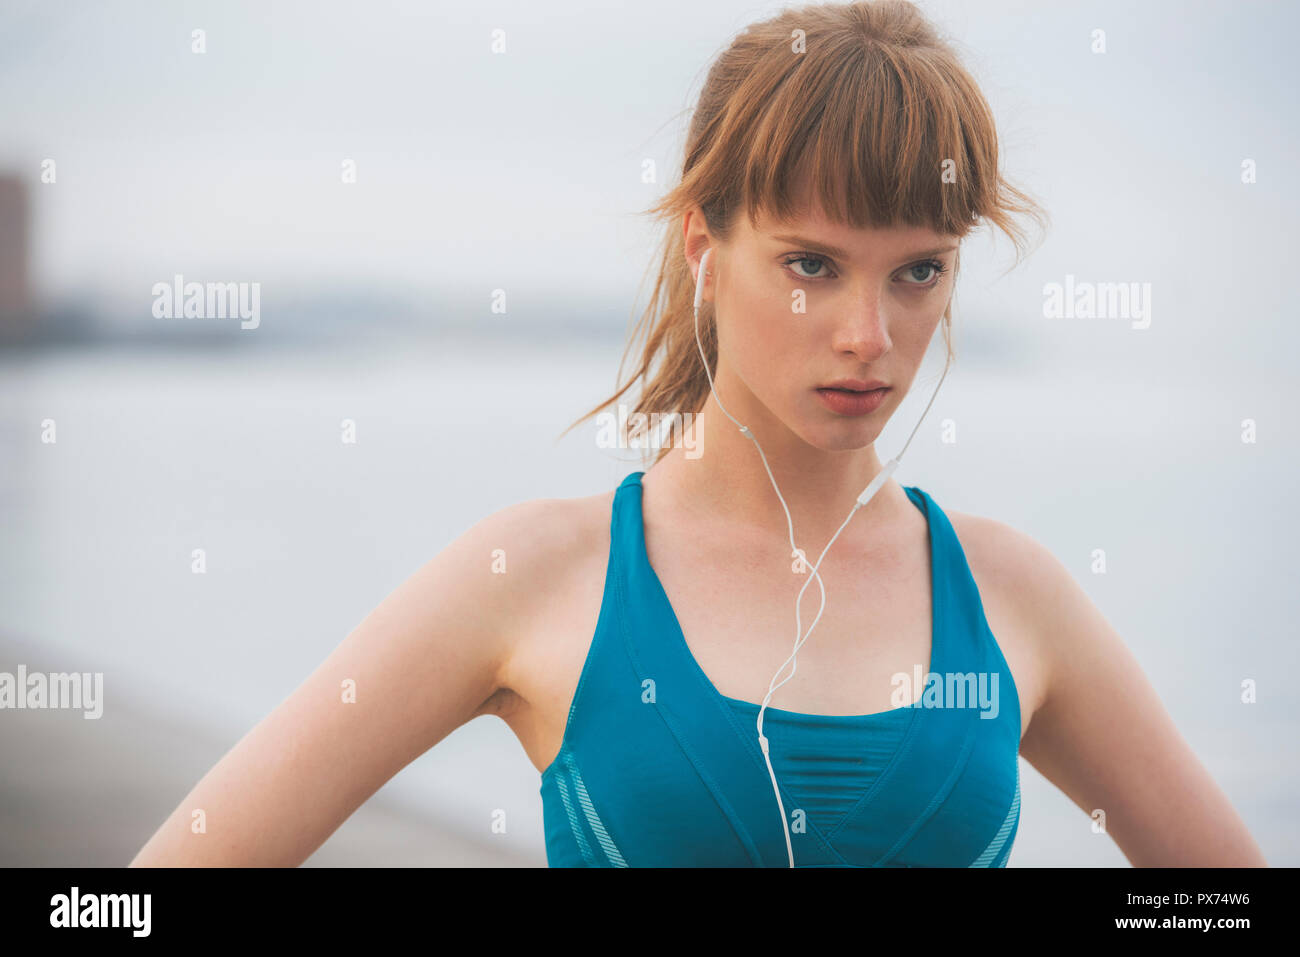 close up of a determined woman athlete running by the seaside in urban city environment Stock Photo